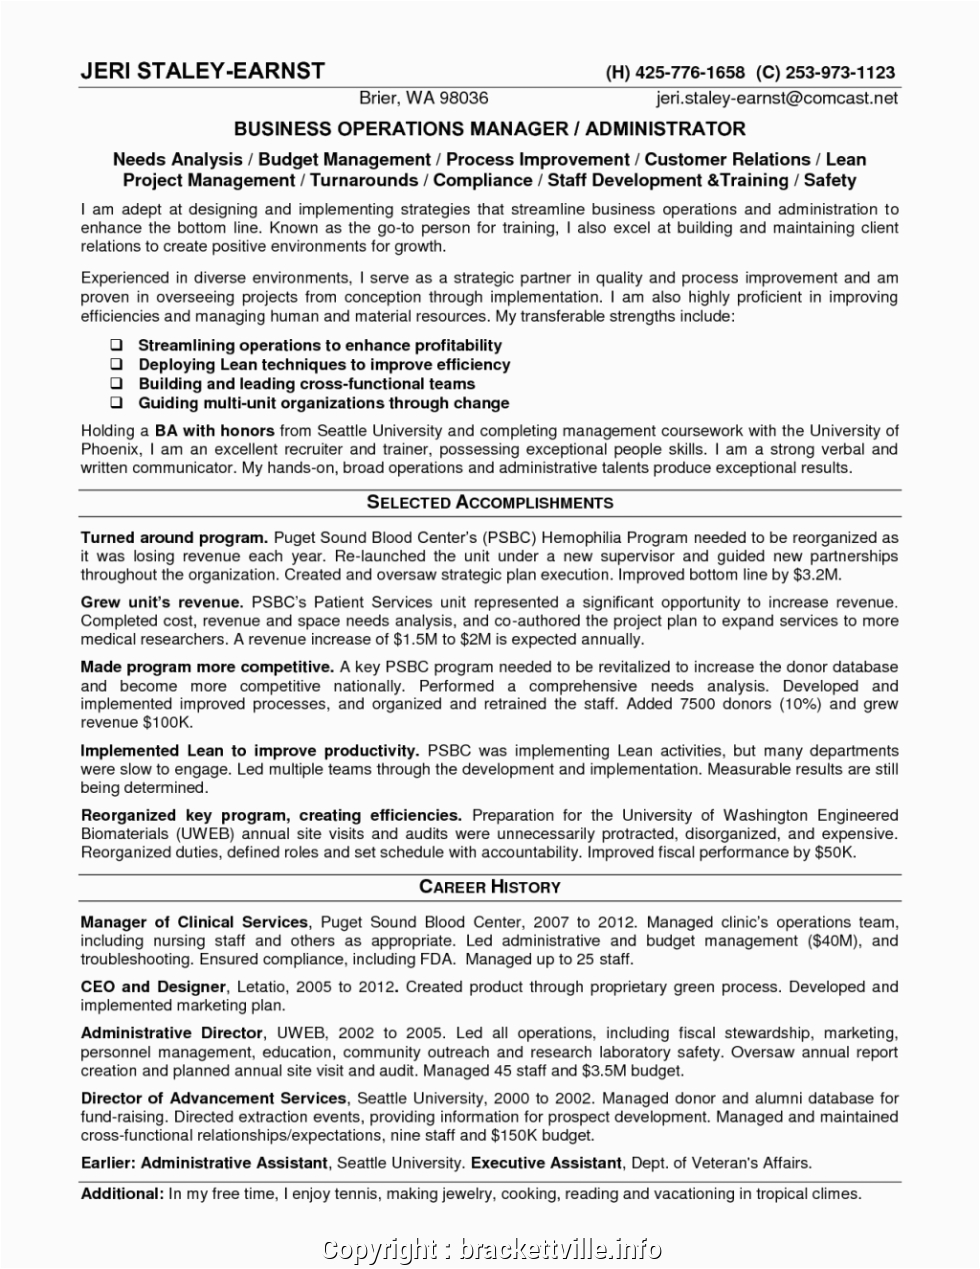 Sample Resume for Production Manager In India top Operations Manager Resume India Operations Manager